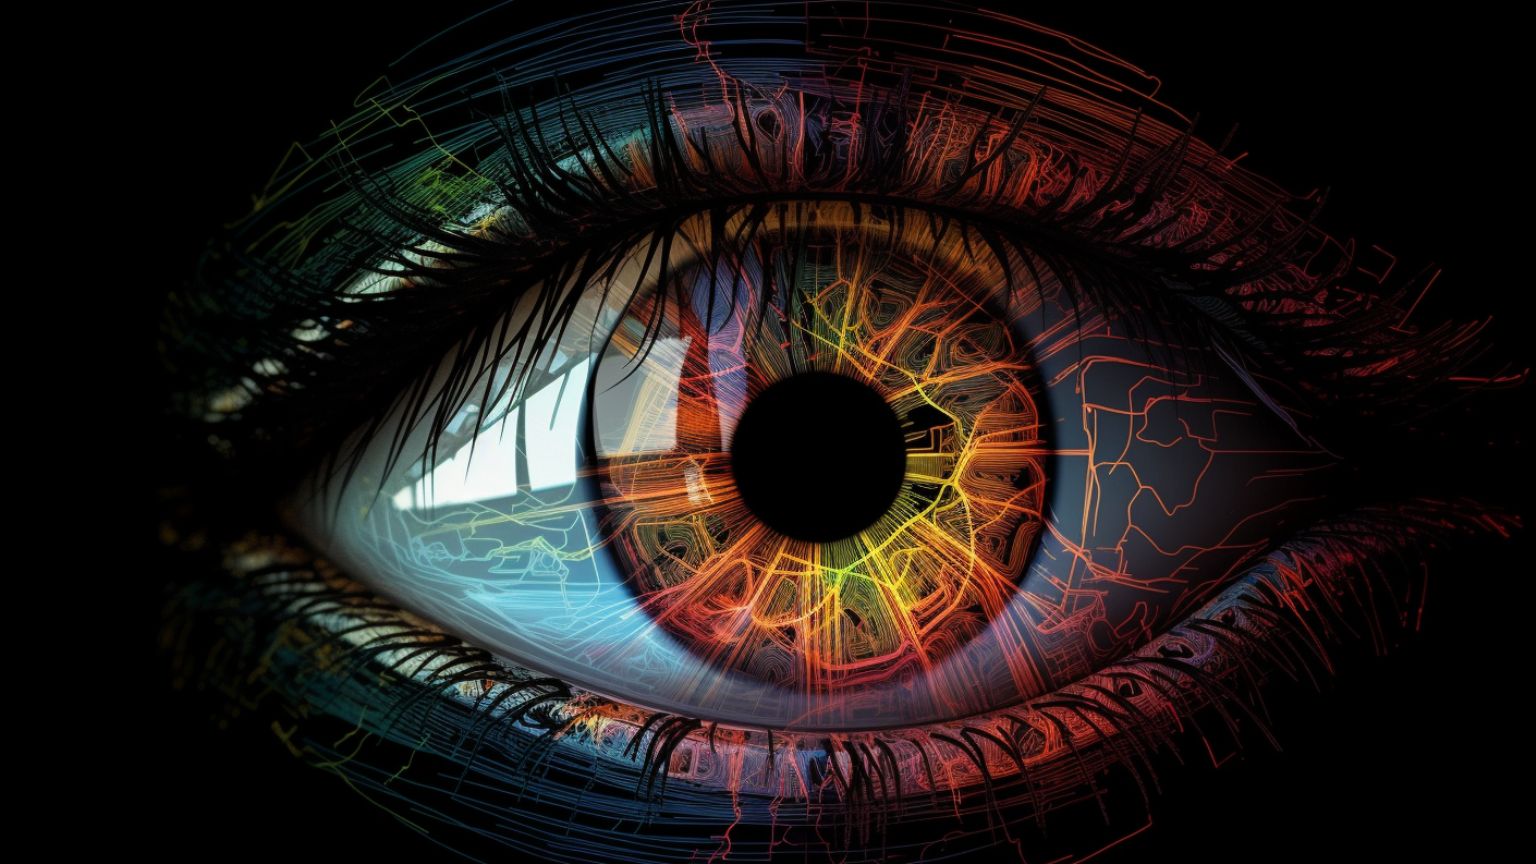 Controversial Eyeball-Scanning Worldcoin To Allow Governments To Use Its Digital ID System